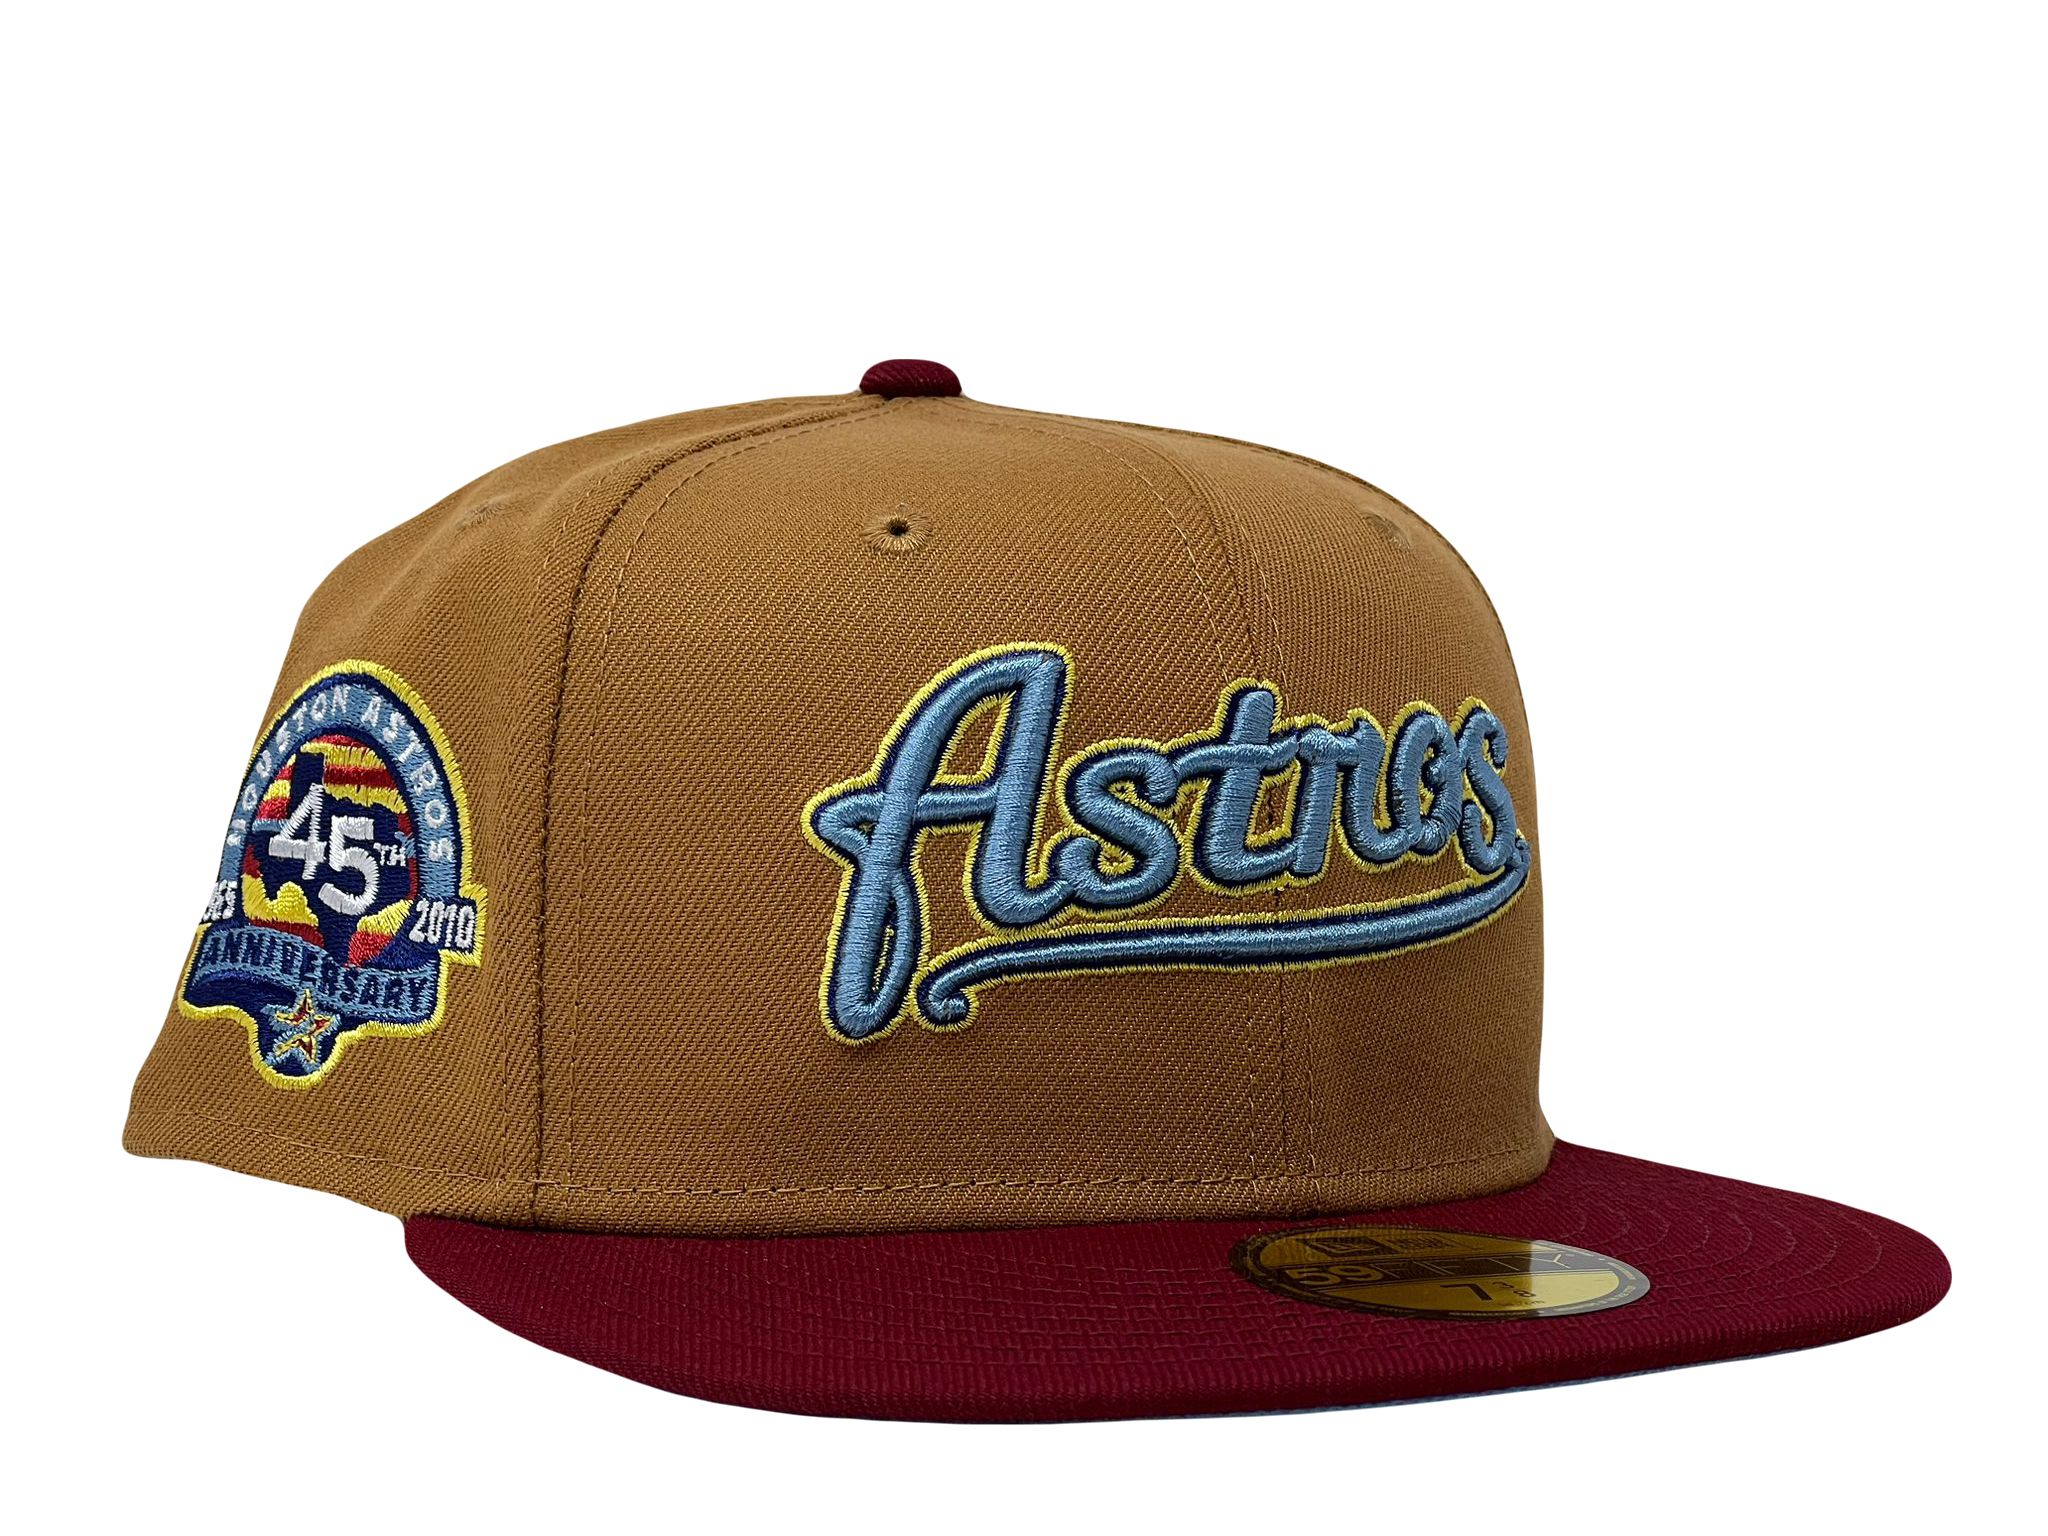 Astros blue/baby blue New Era Fitted Hat